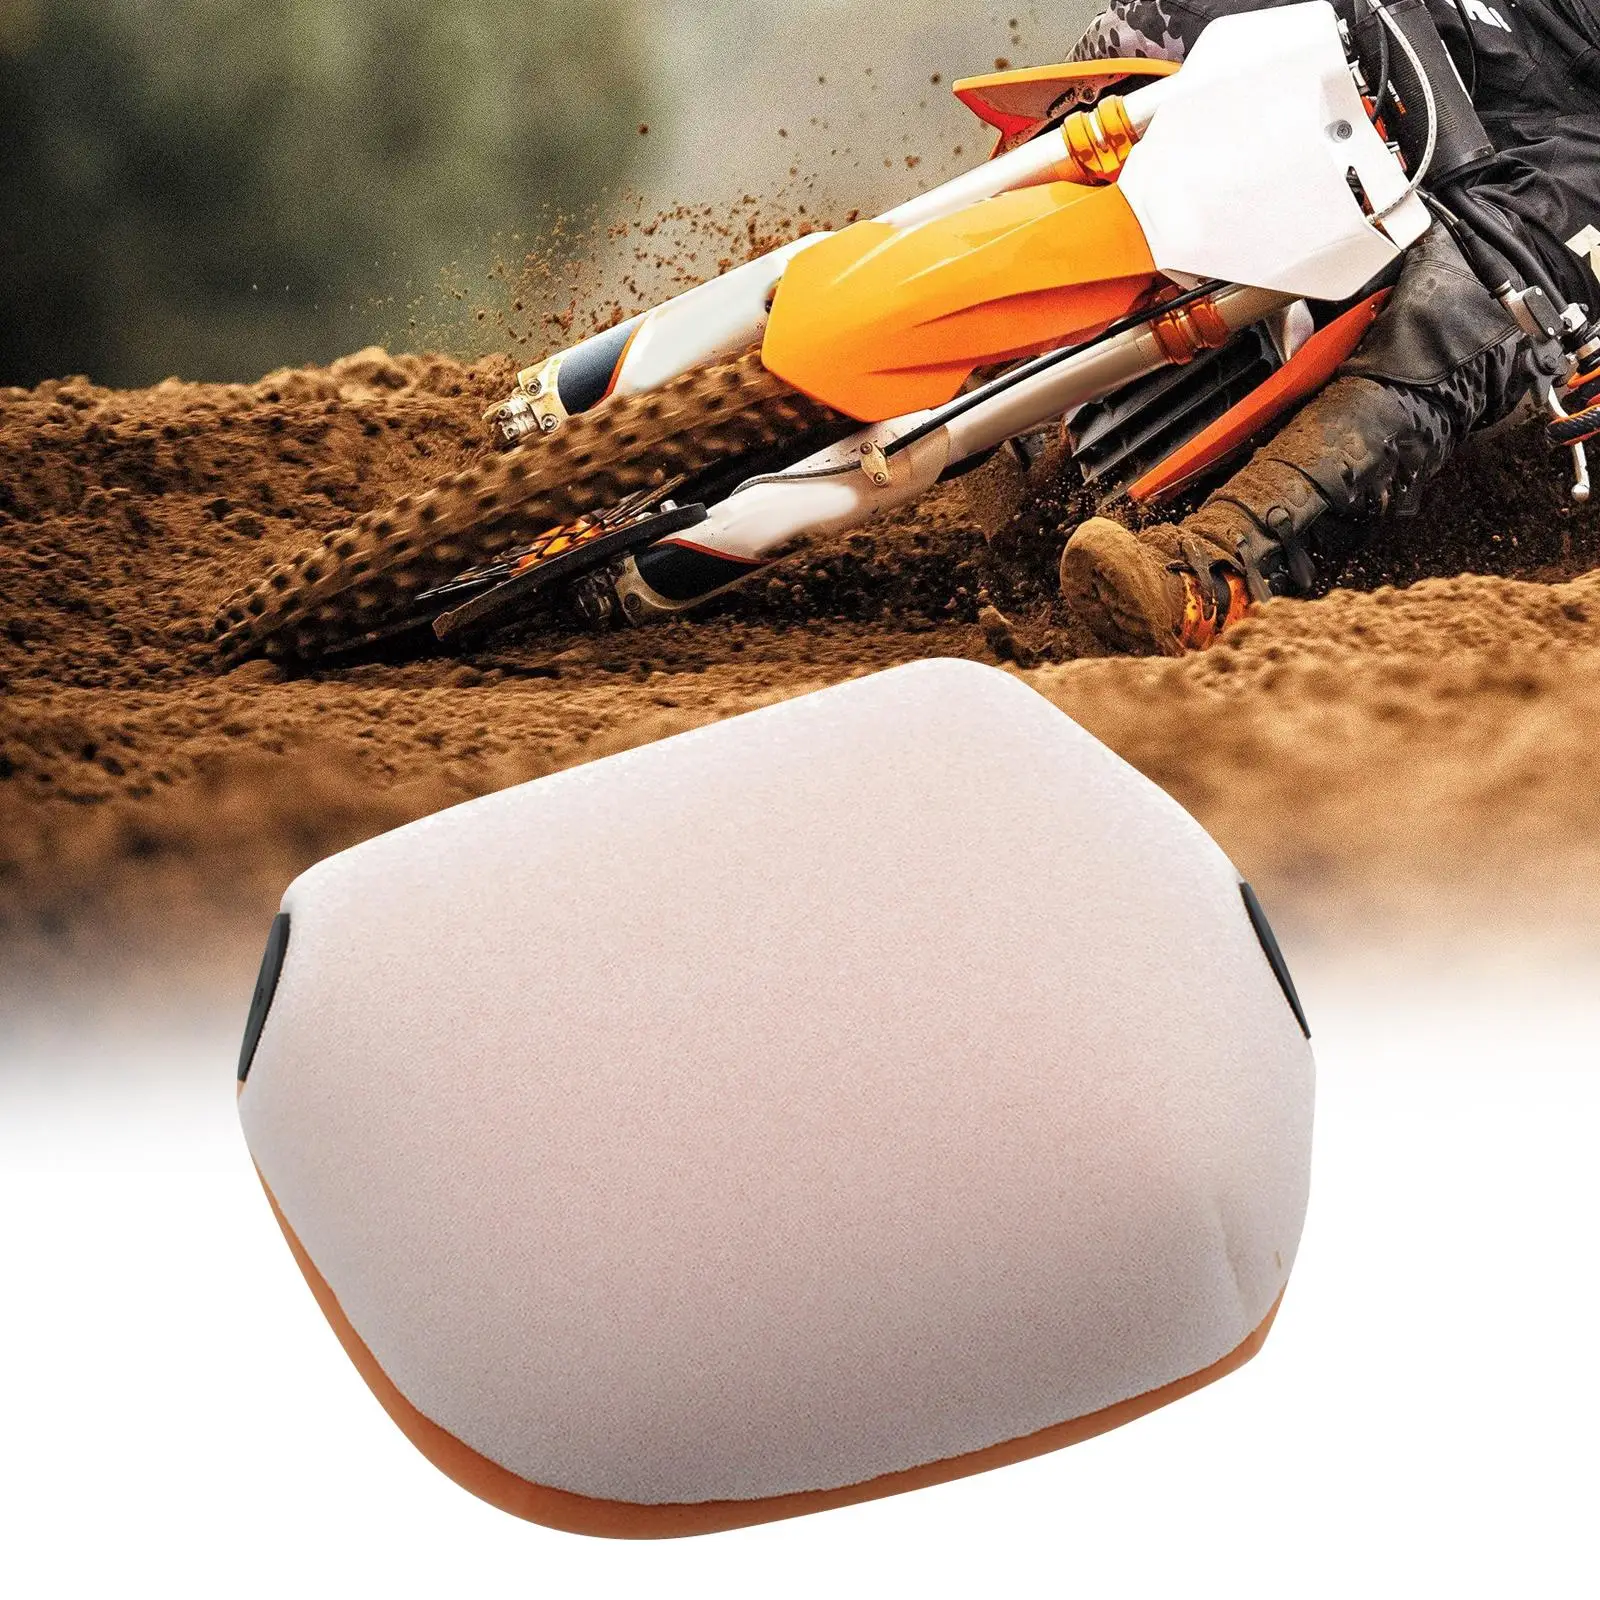 Motorbike foam Filter Professional for SX/Sxf125 350 Replaces